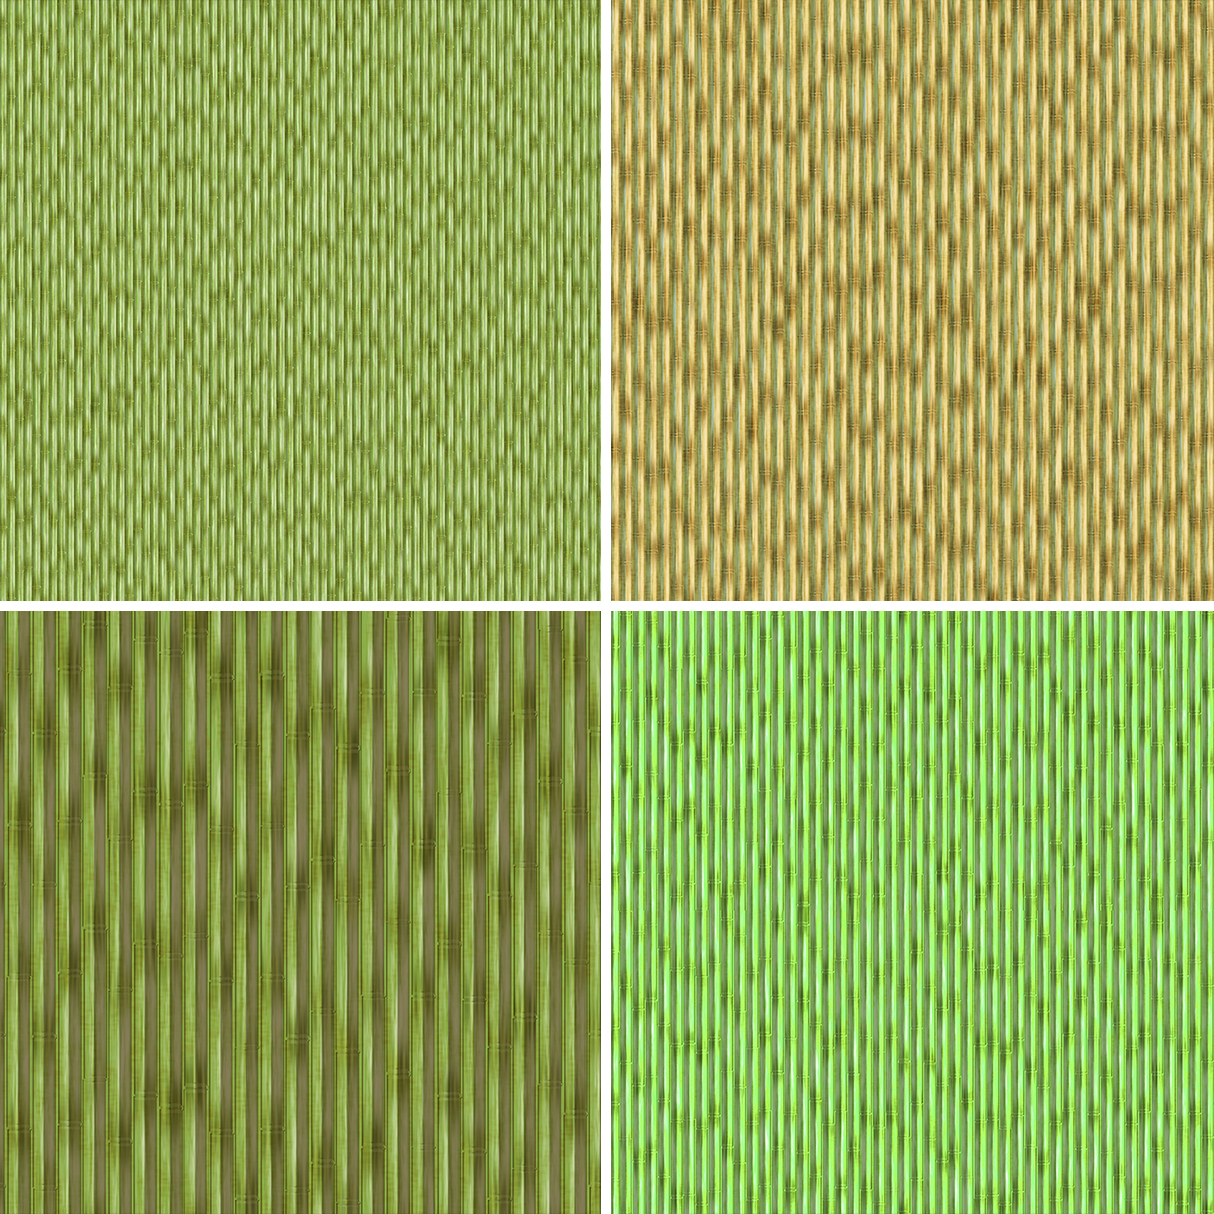 20 Bamboo Background Textures Square Samples Preview 4